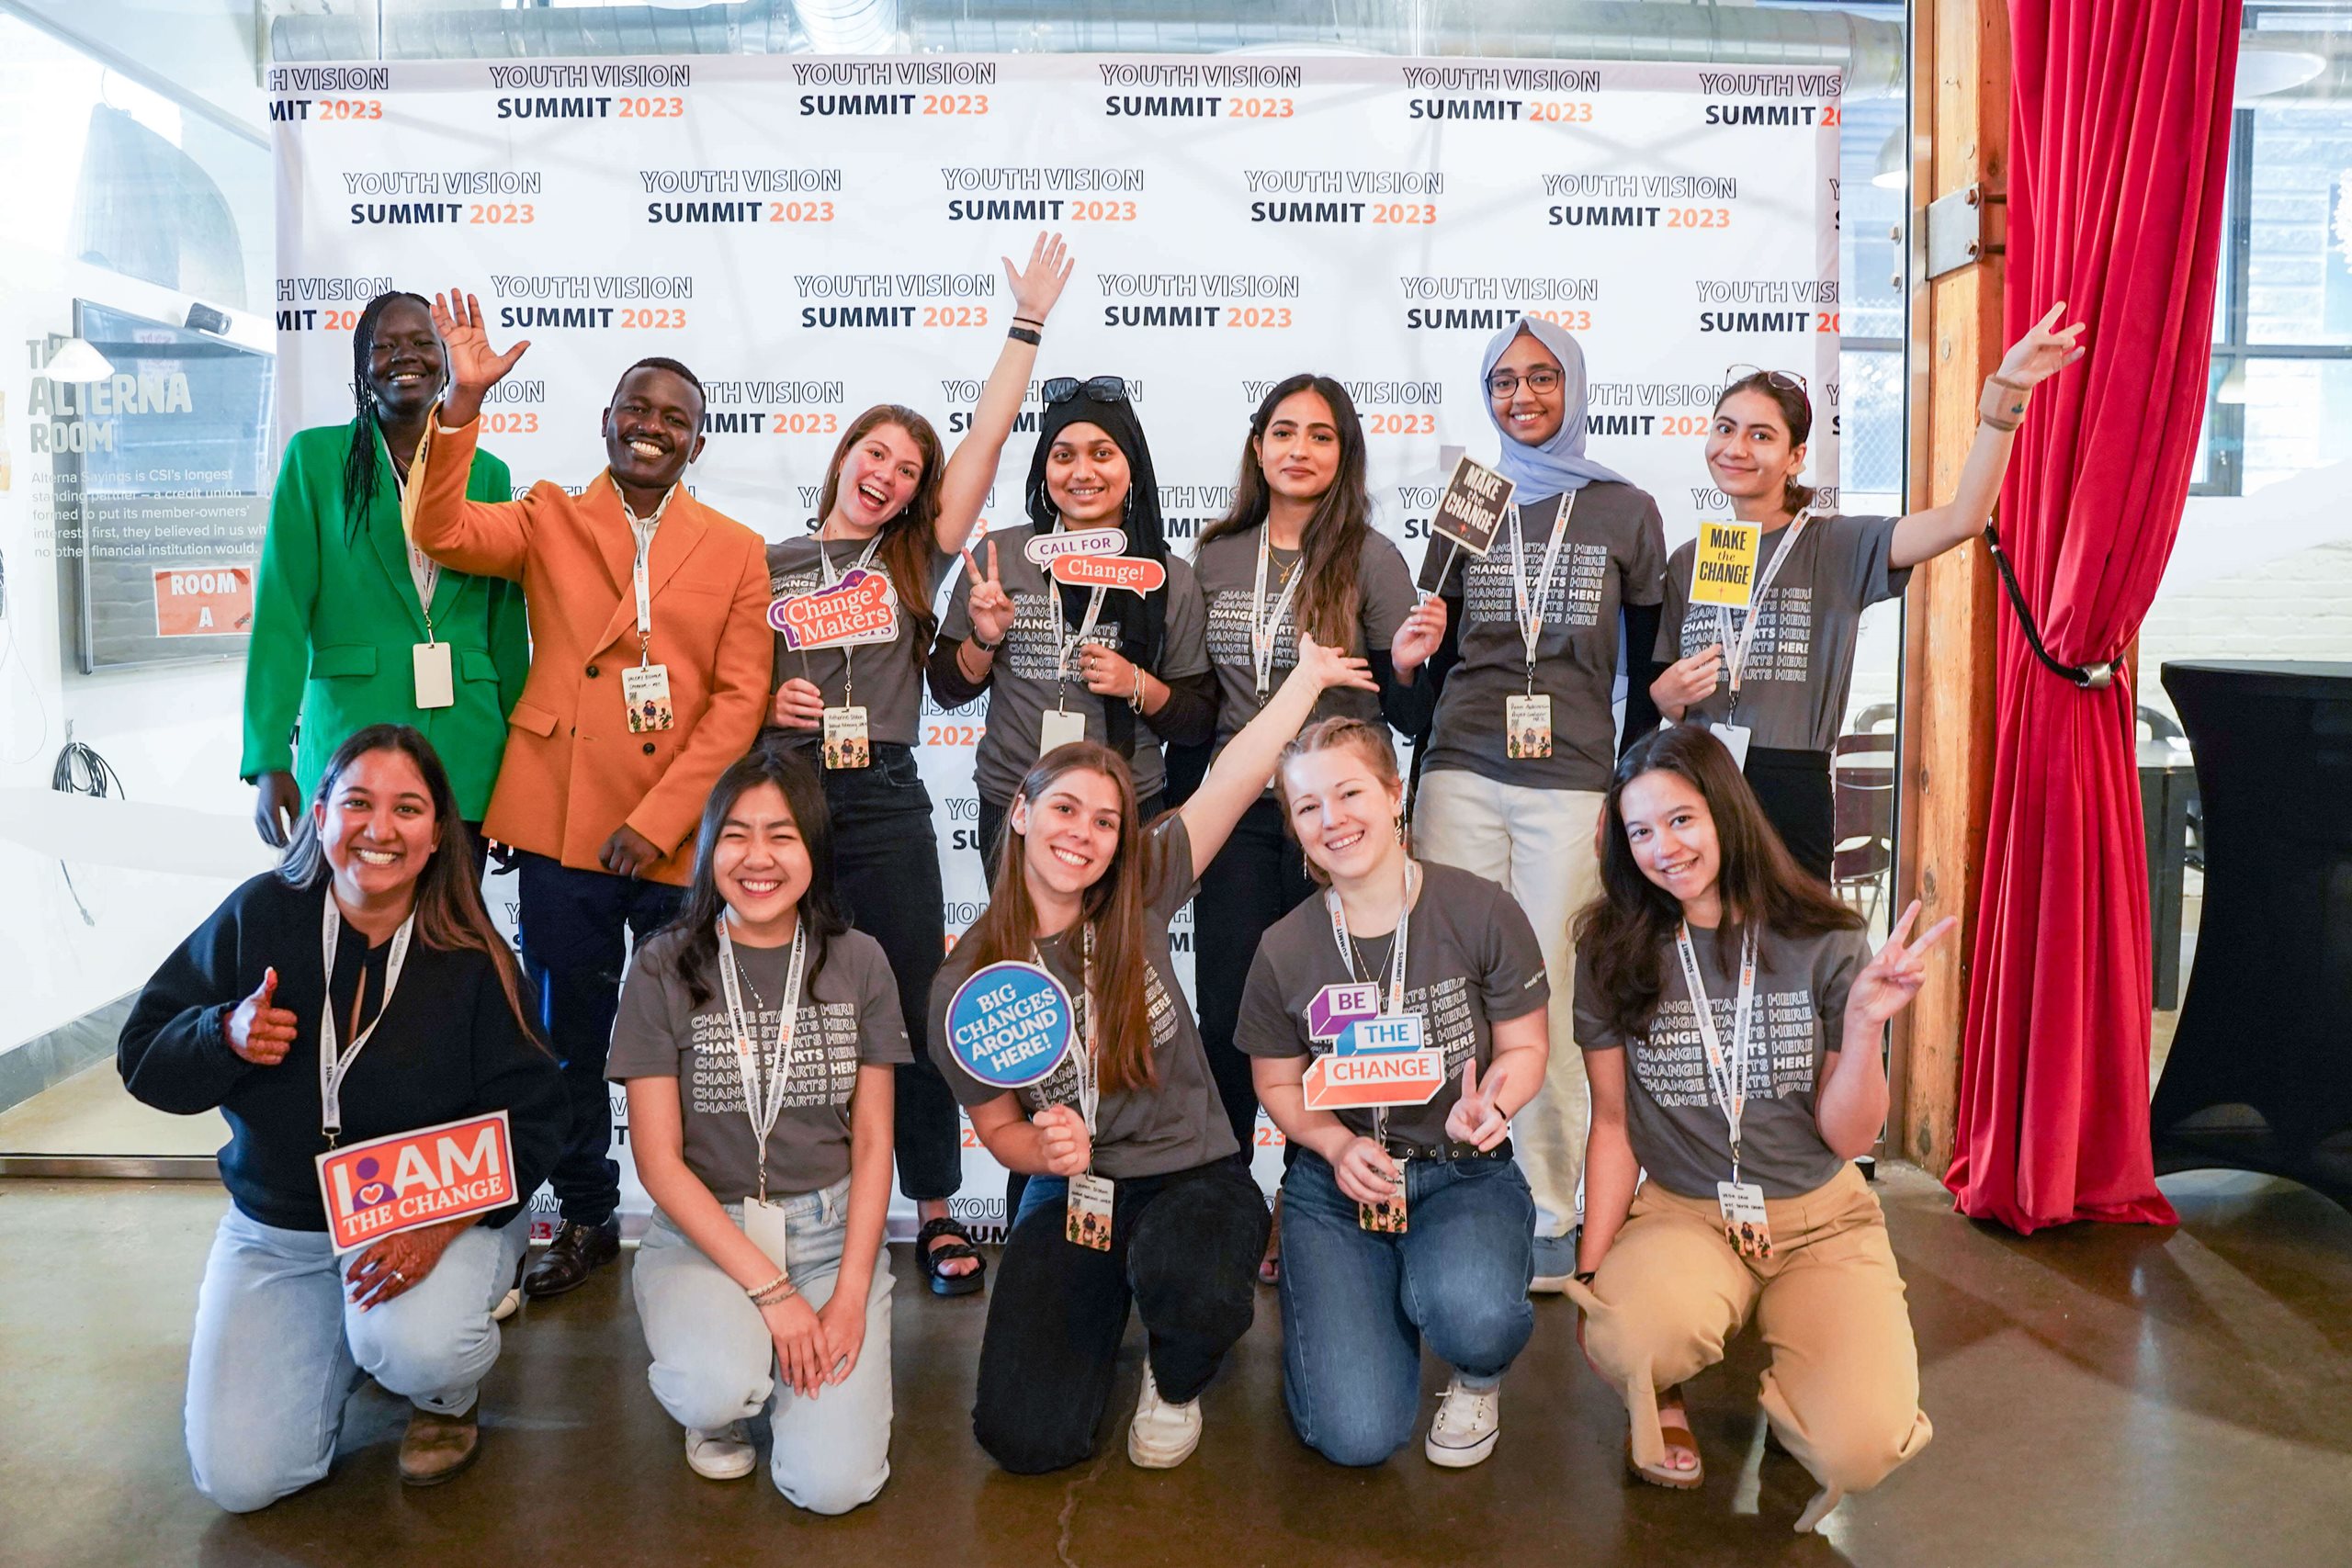 The World Vision Canada Youth Council at the inaugural Youth Vision Summit in Toronto, 2023.